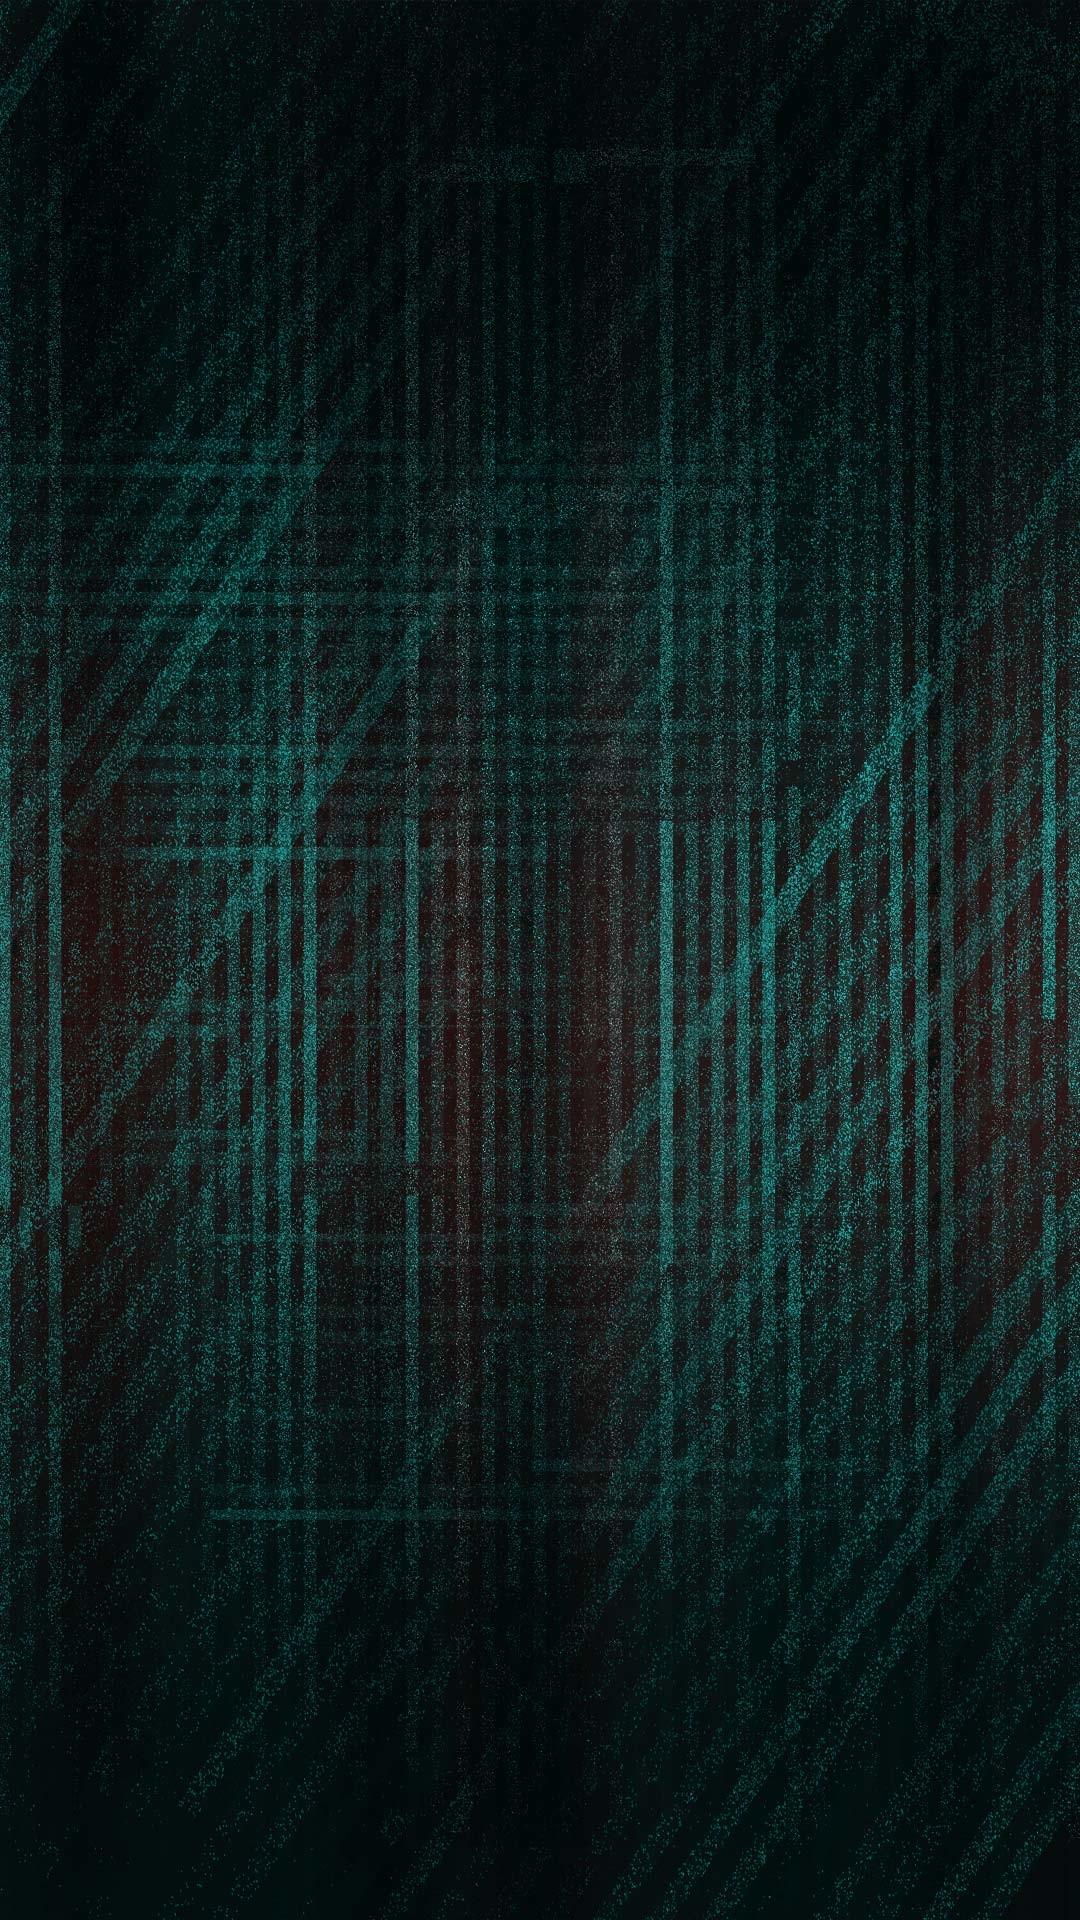 Black and Teal Wallpaper